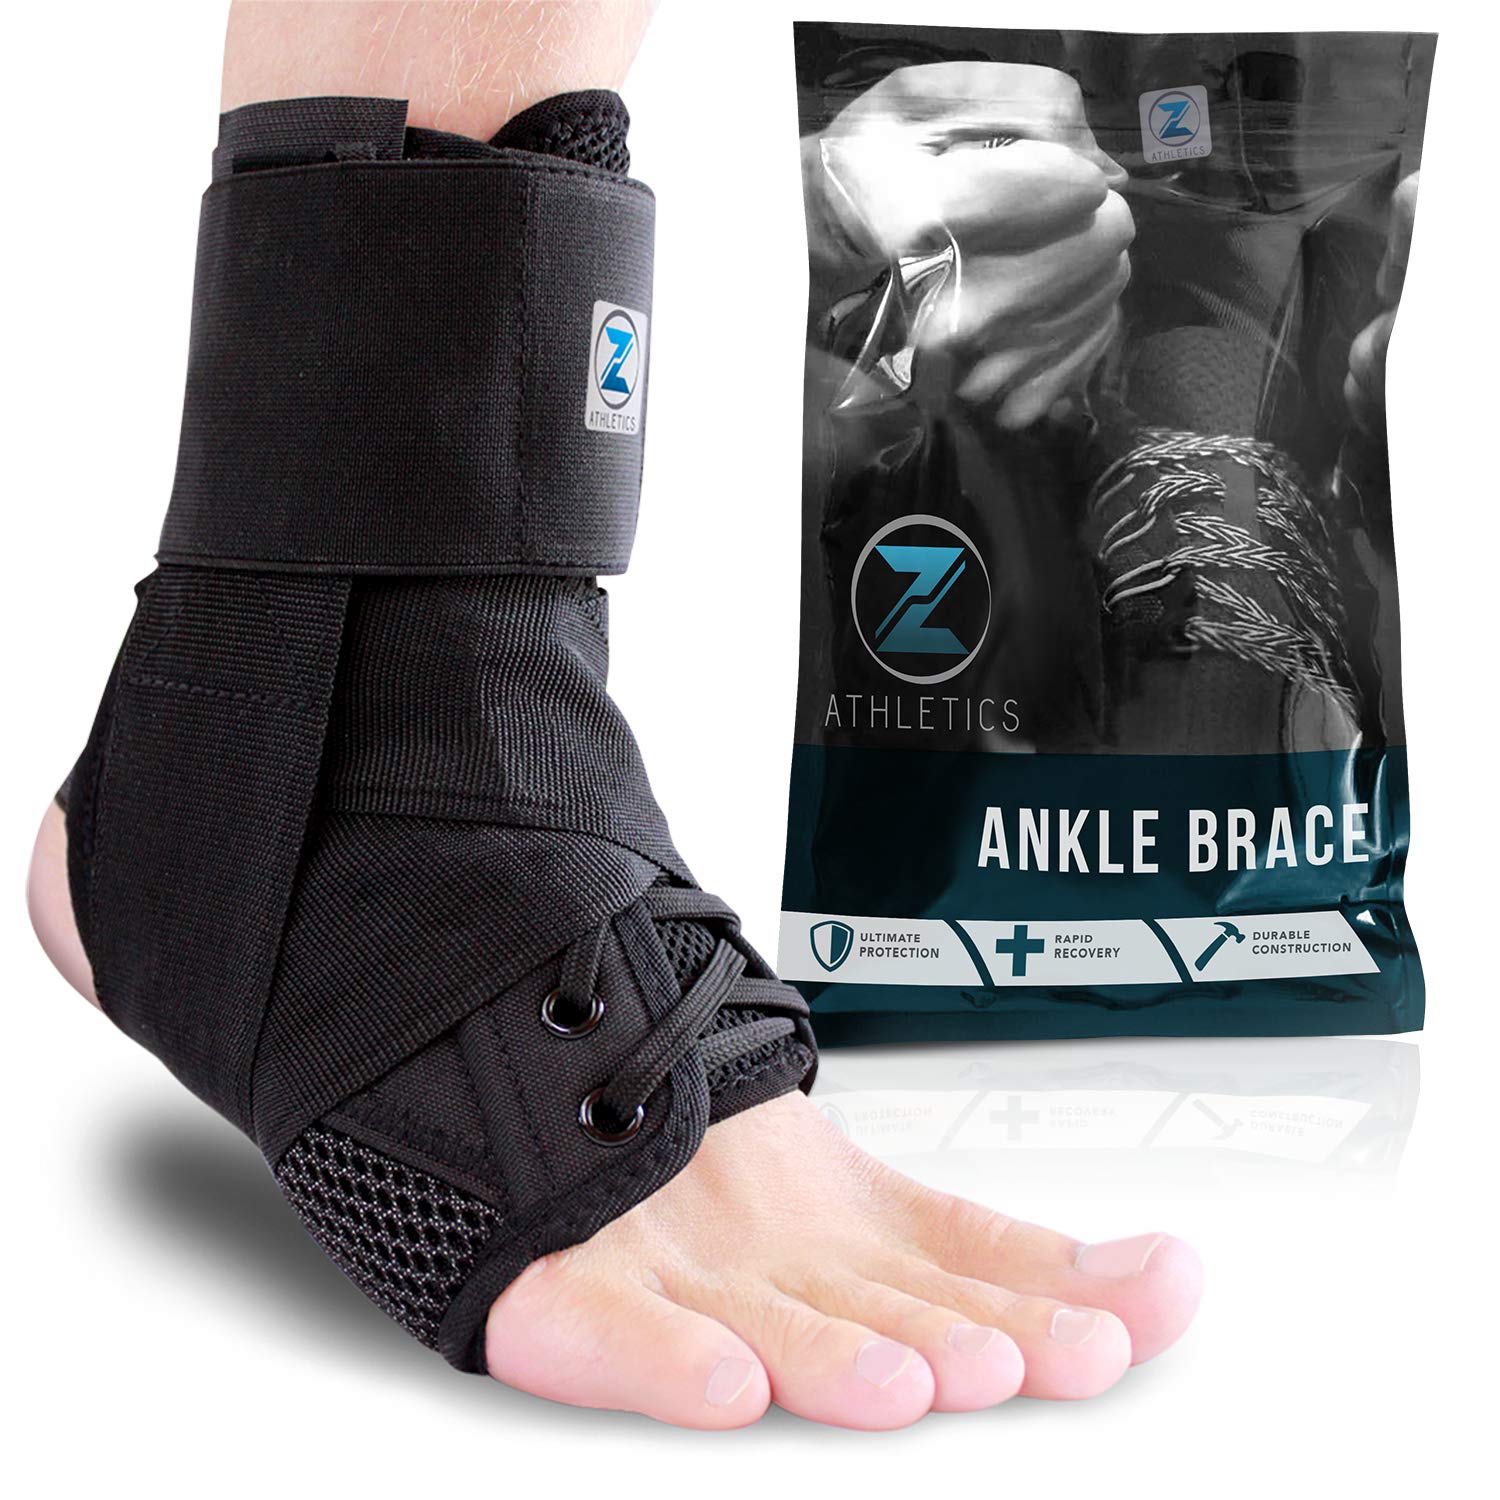 Best Ankle Braces for Runners and Athletes Review of 5 Top Brands 8872